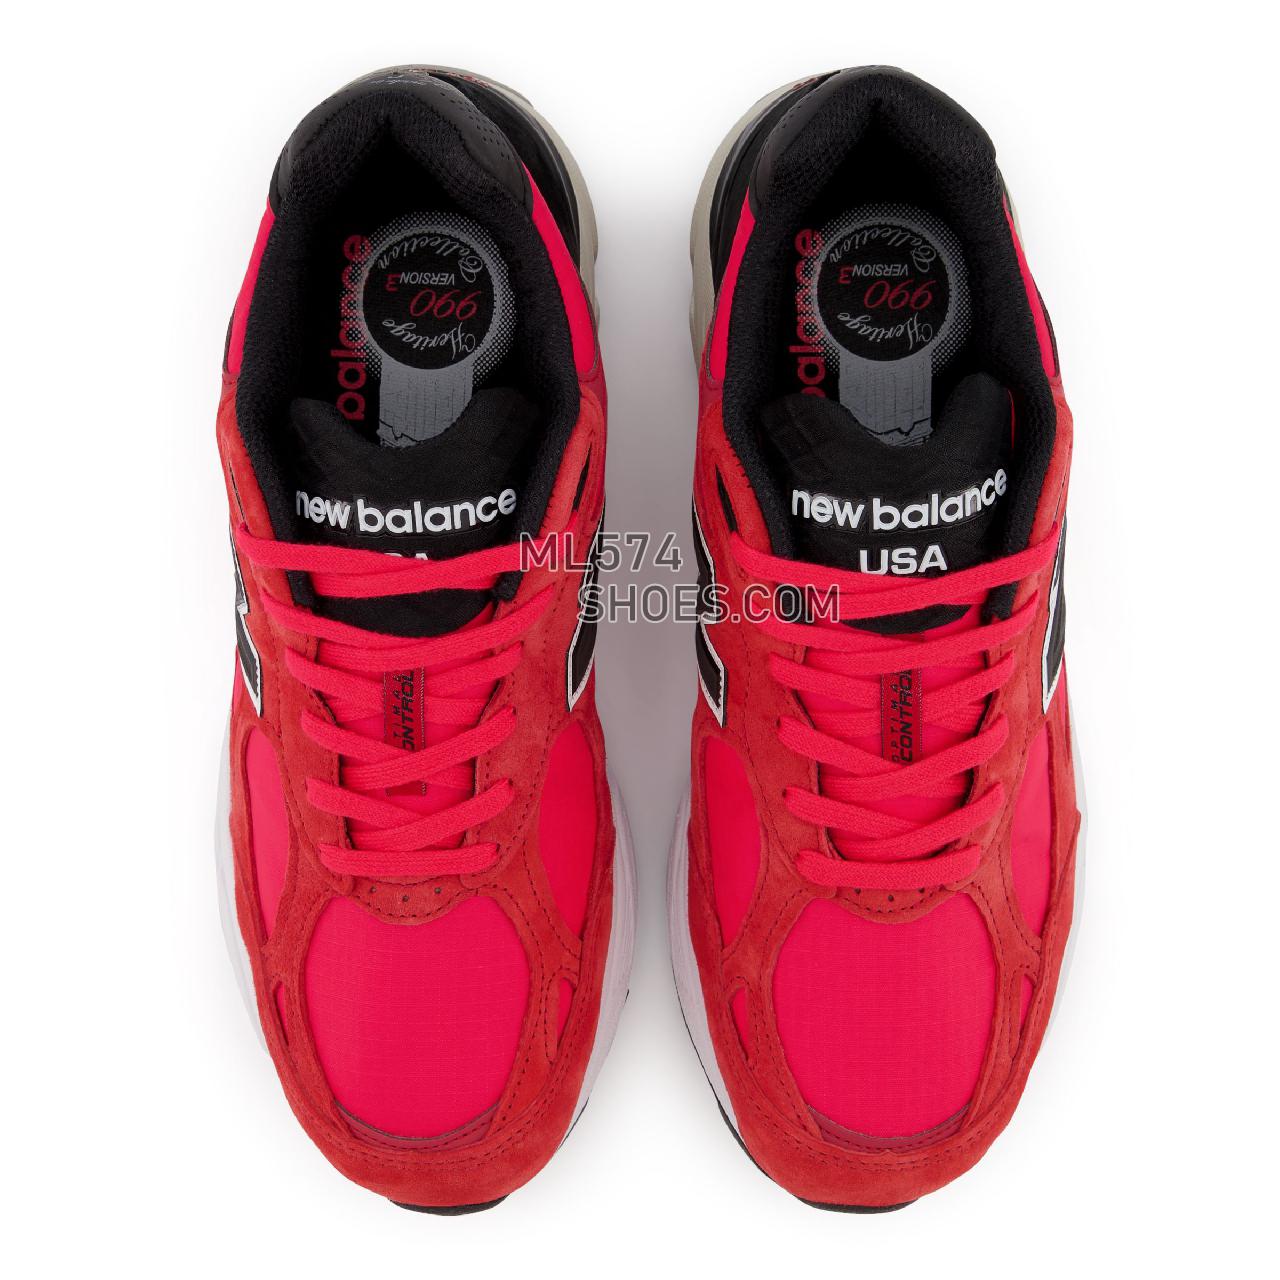 New Balance Made in USA 990v3 - Men's Made in USA And UK Sneakers - Red with Black - M990PL3